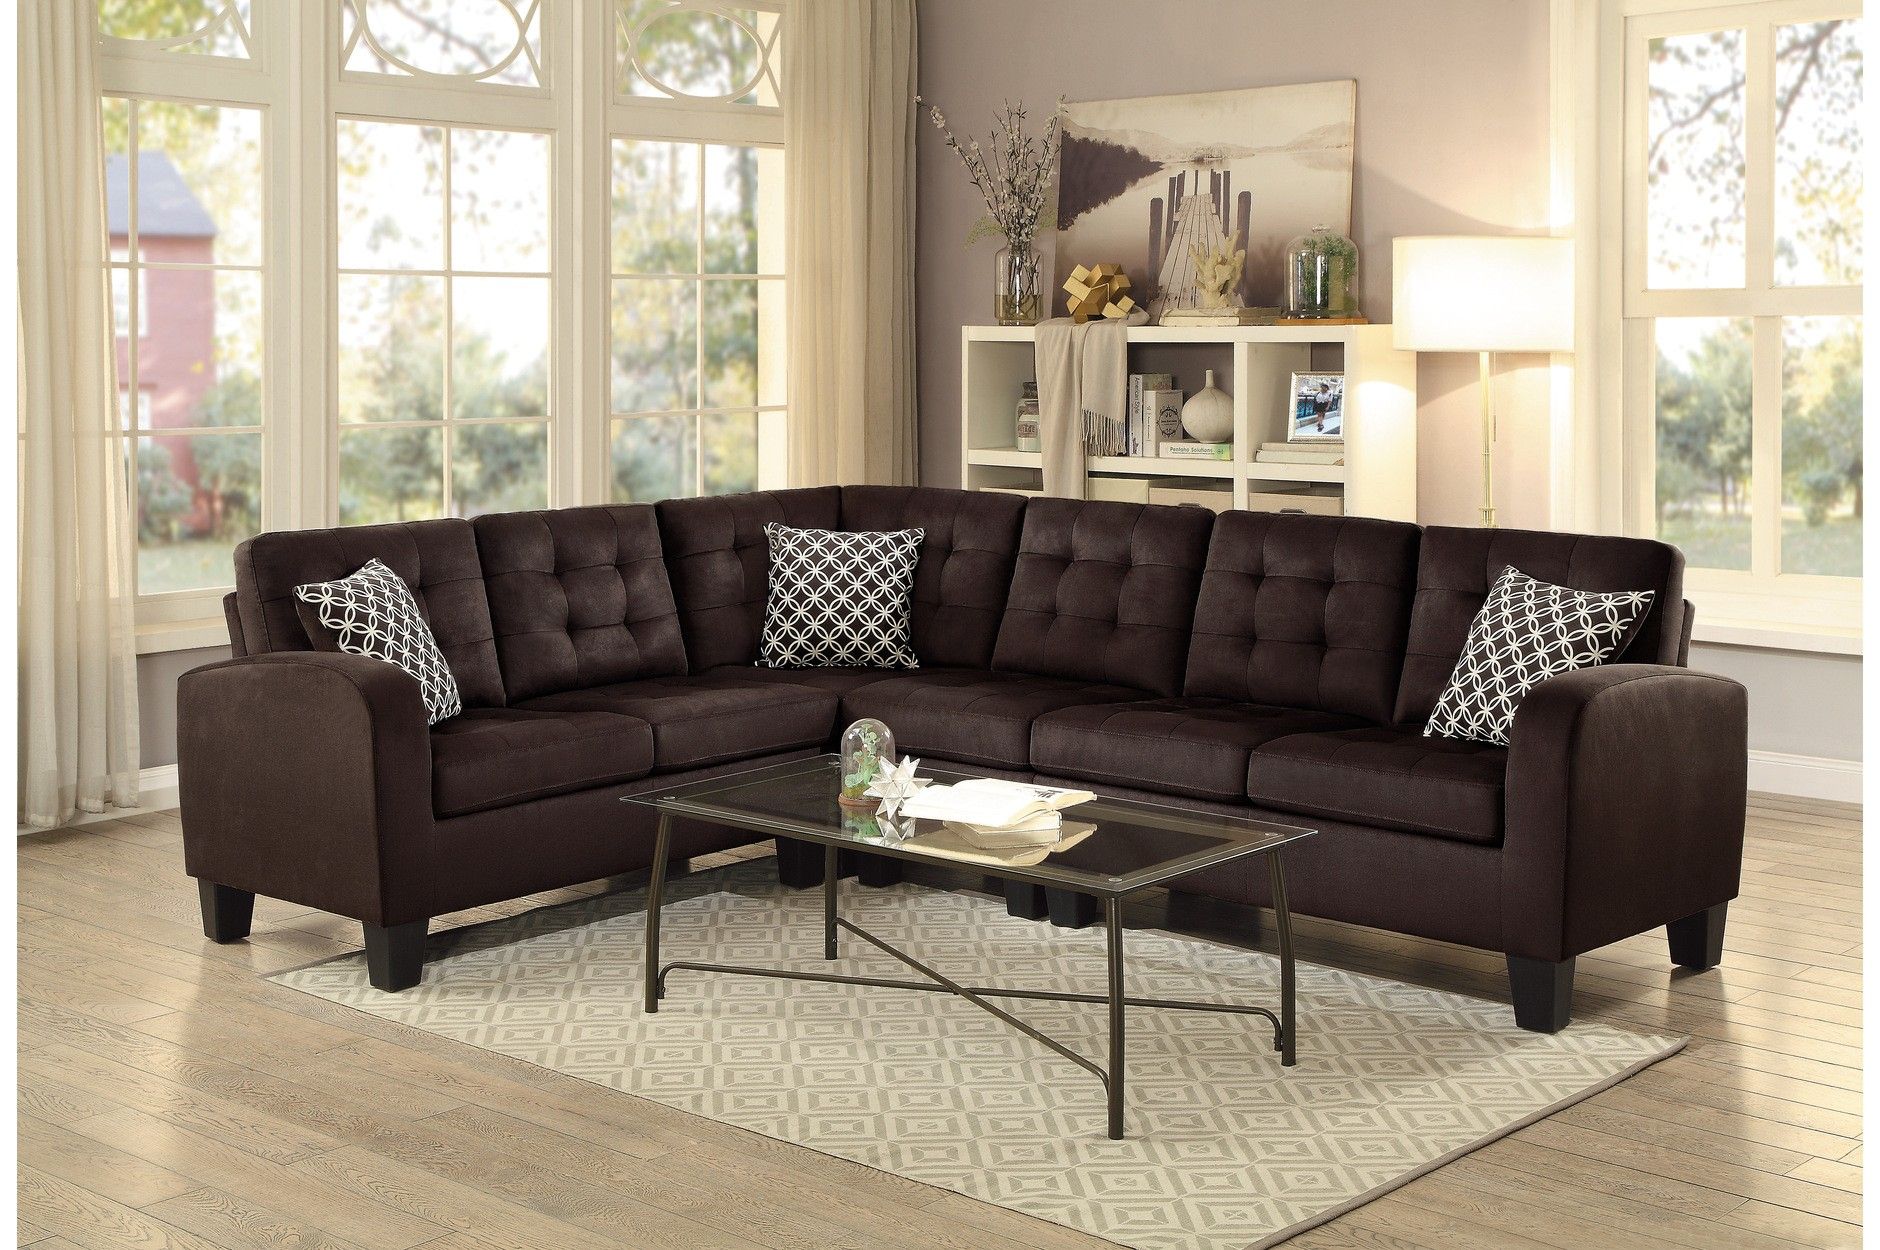 New l shape sectional sofa tax included delivery available